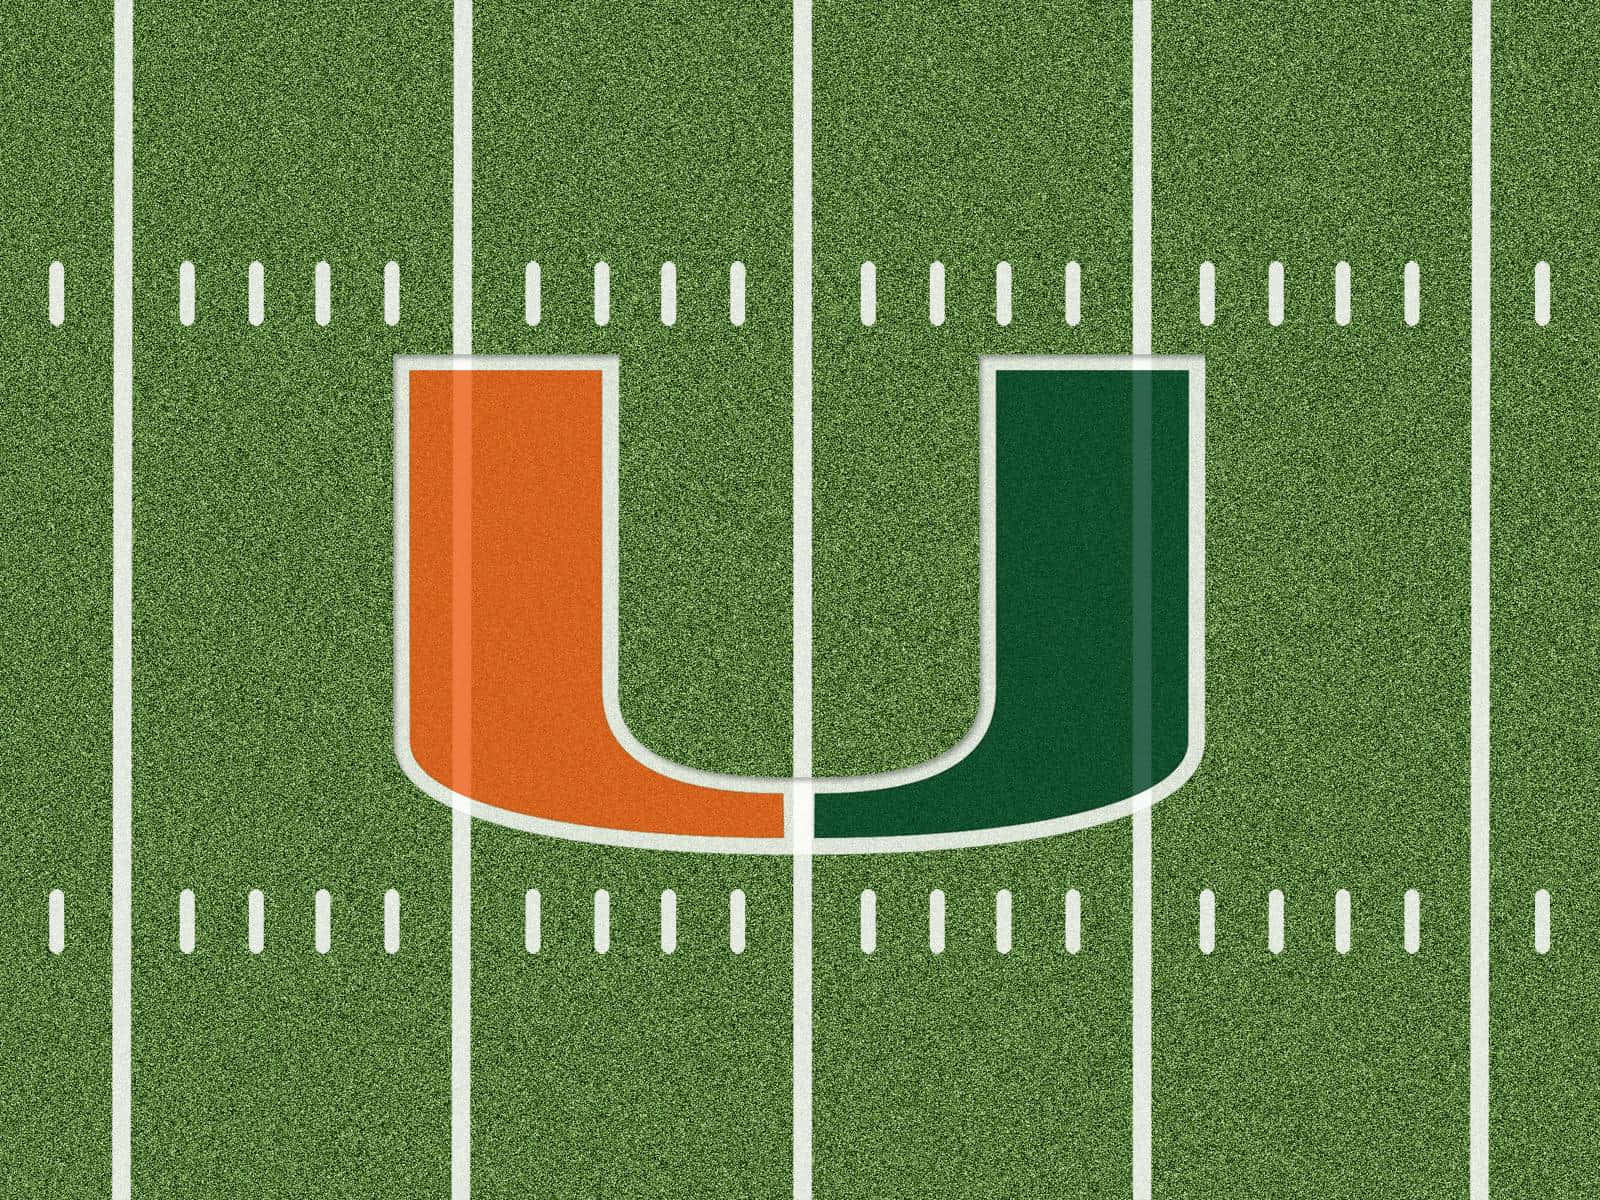 The Miami Hurricanes Spirit Is Alive And Well! Wallpaper